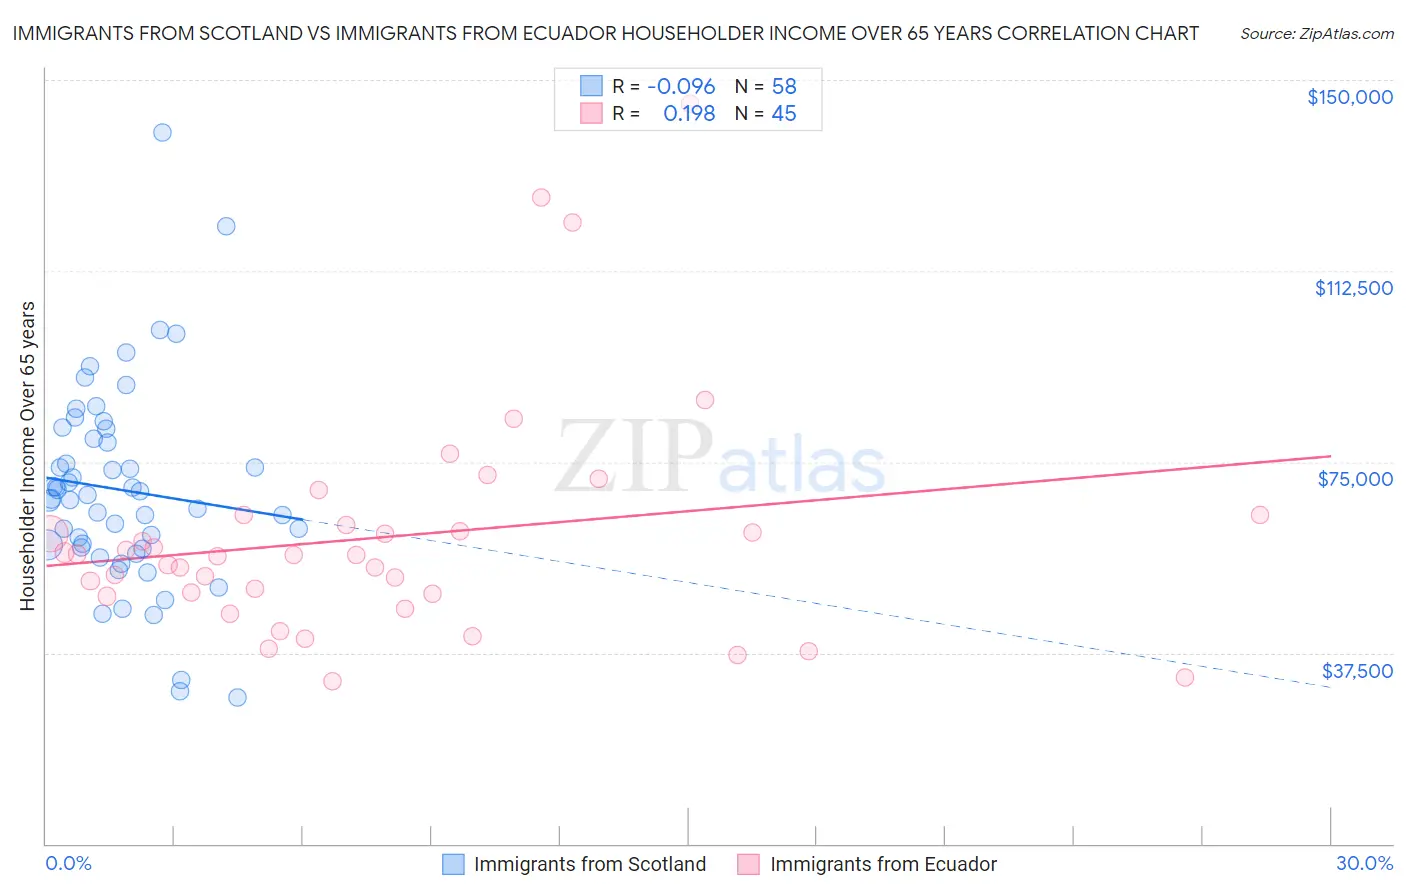 Immigrants from Scotland vs Immigrants from Ecuador Householder Income Over 65 years